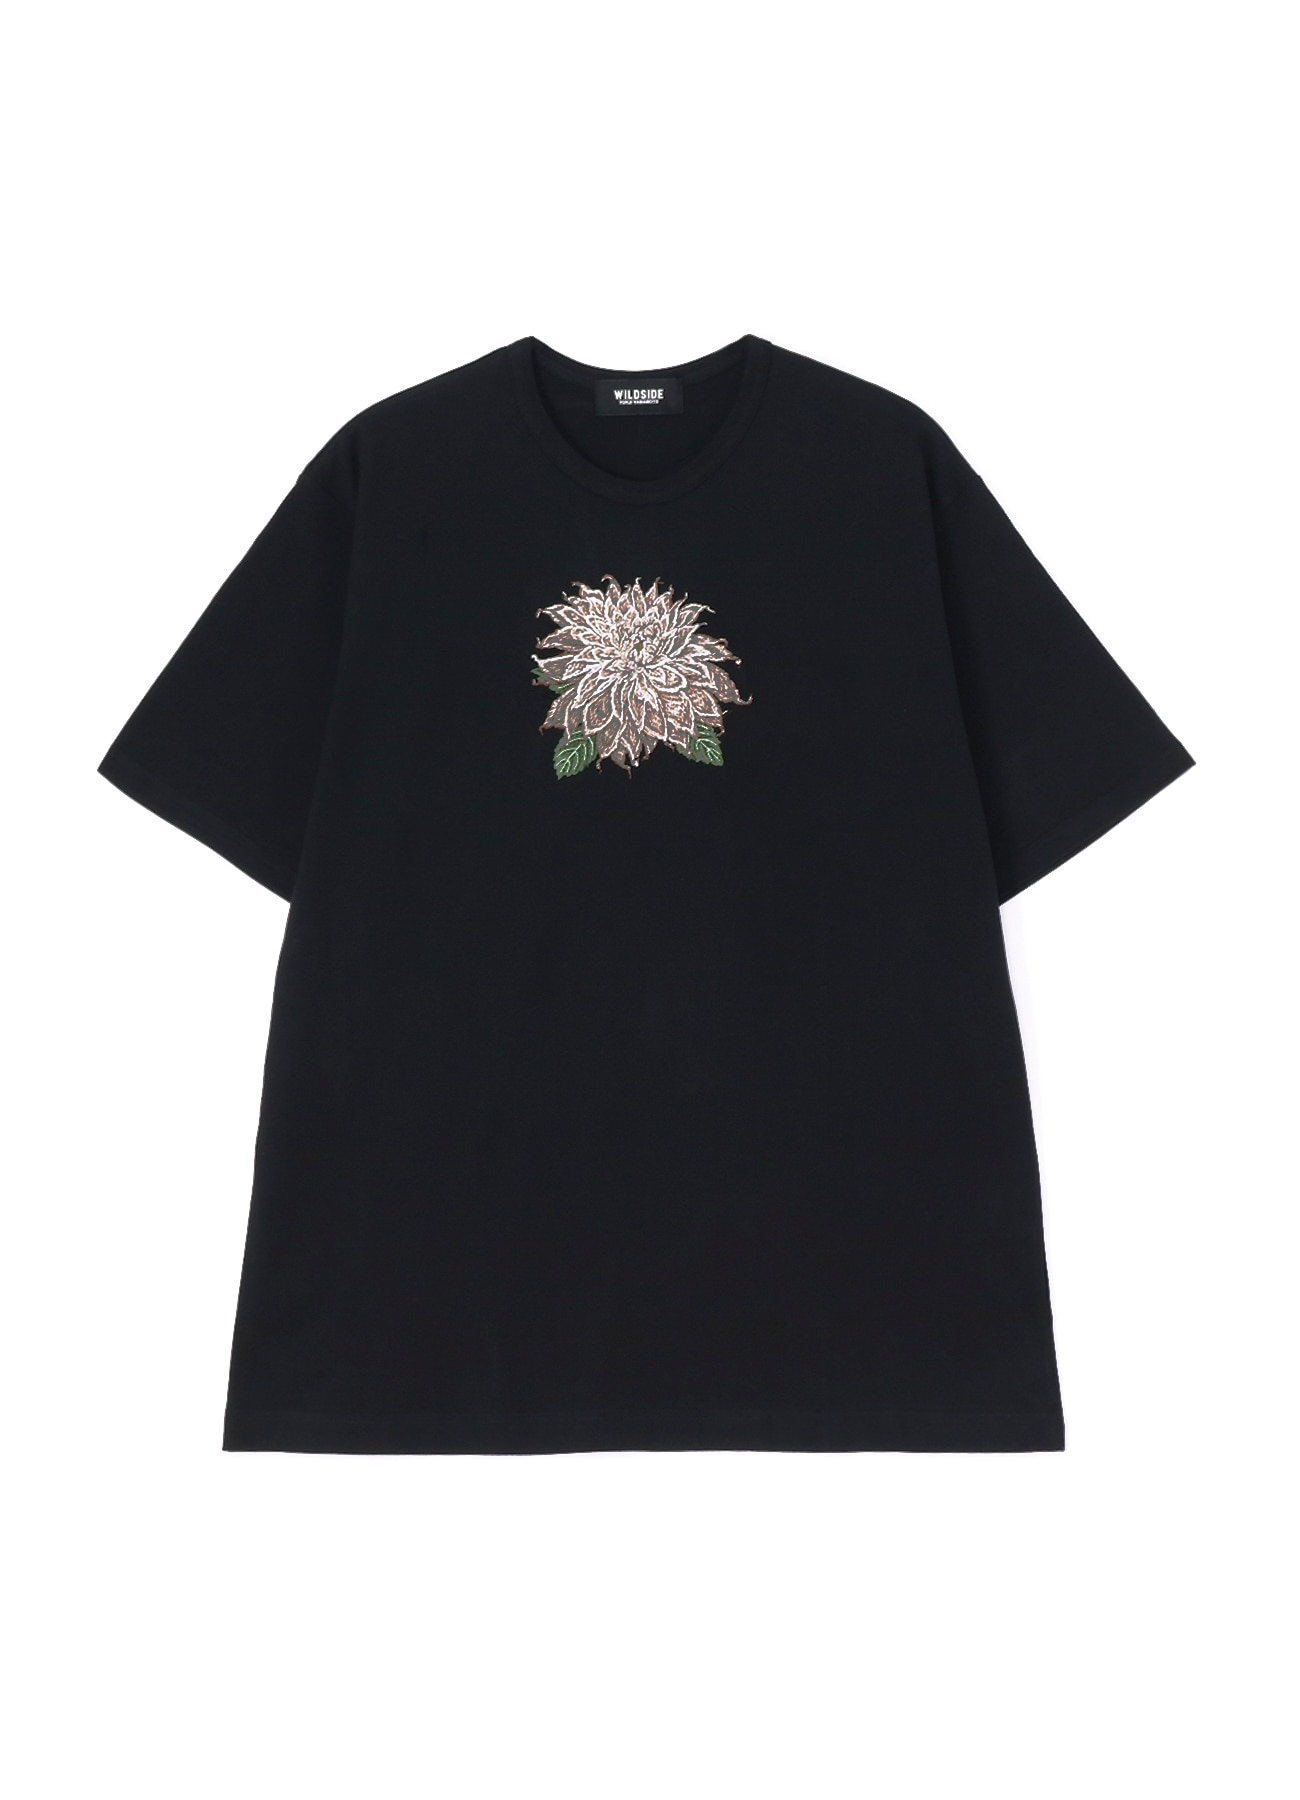 【5/8 12:00(JST) Release】Embroidery Dahlia SS T-shirt